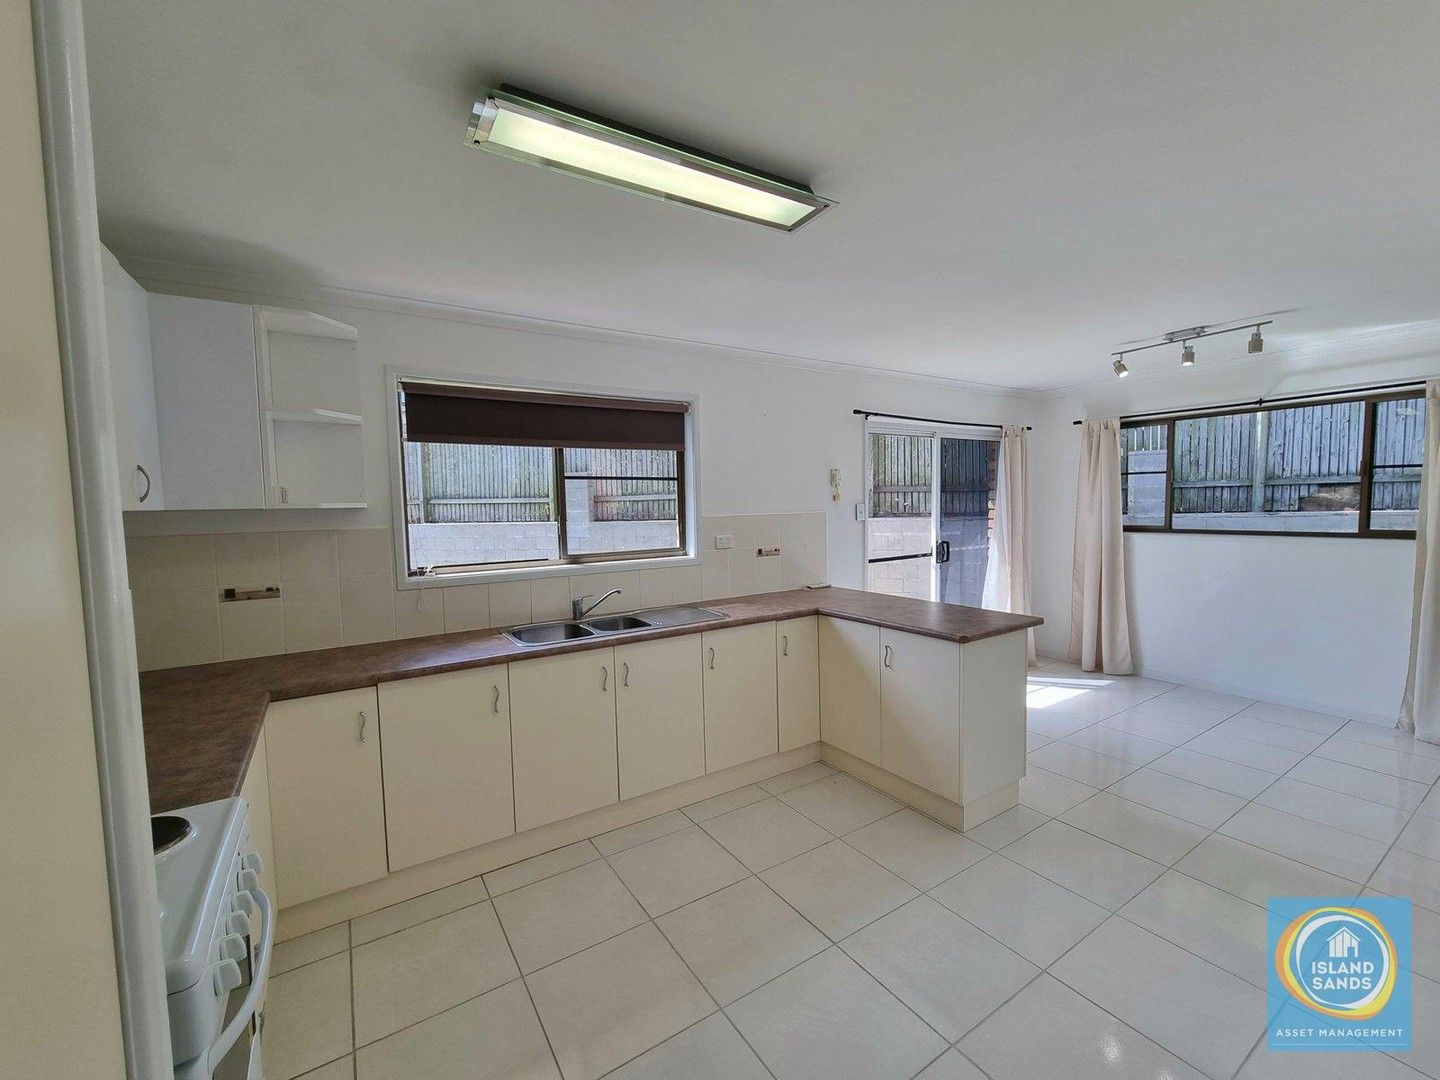 2 bedrooms House in 2/3 Fox Court TANNUM SANDS QLD, 4680